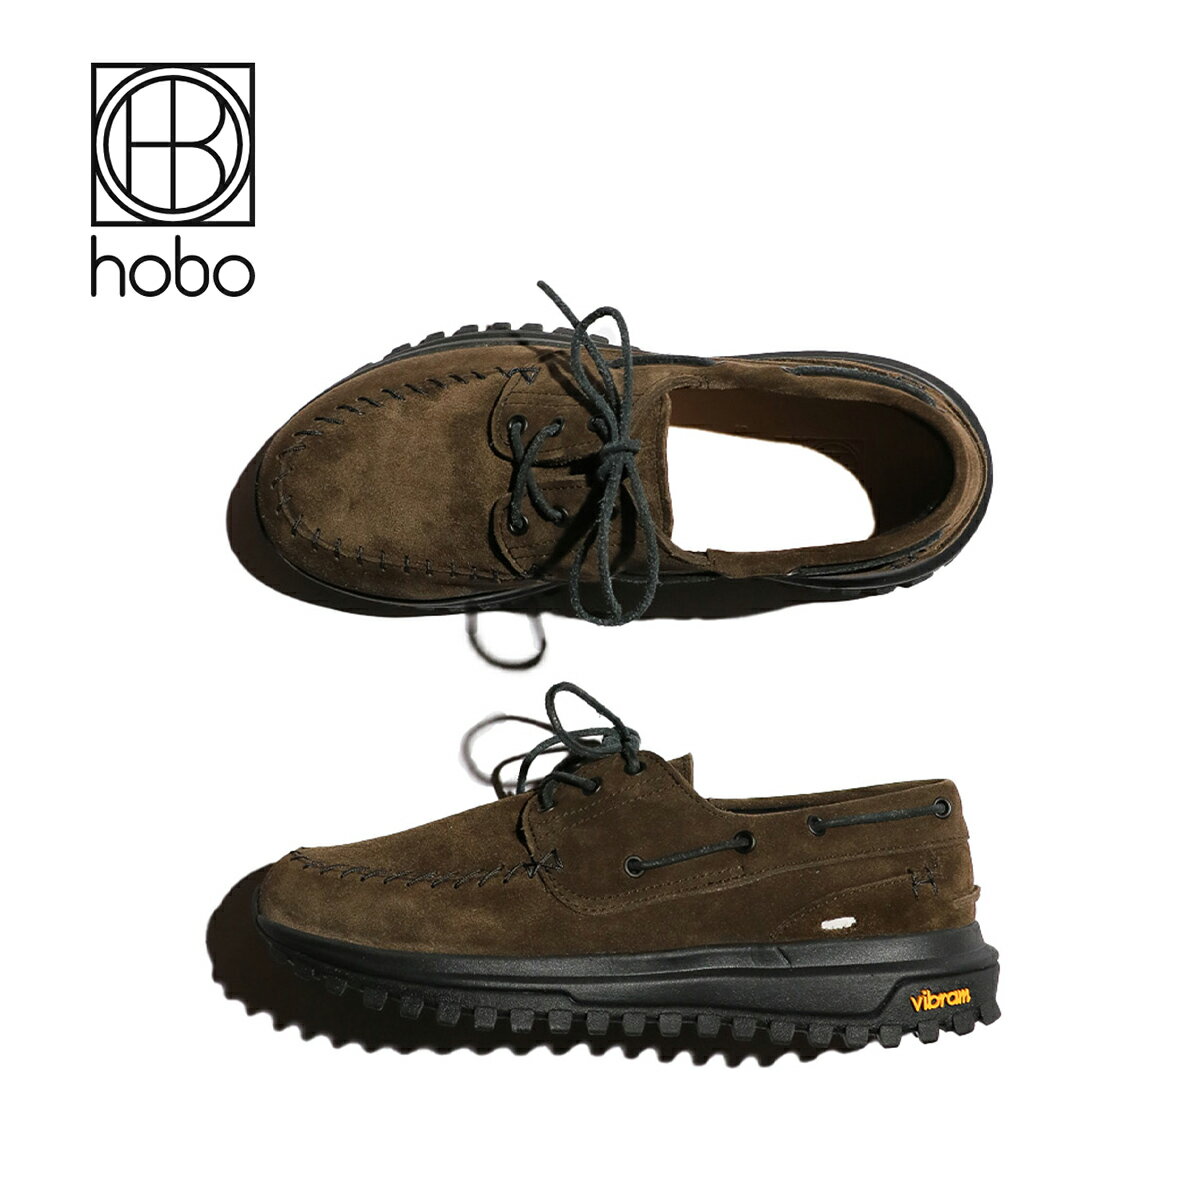 【HOBO × sun℃ore / ホーボー × サンコア】 DECK SHOES COW SUEDE by SUNCORE (HB-F4301) レザー スニーカー デッキシューズ